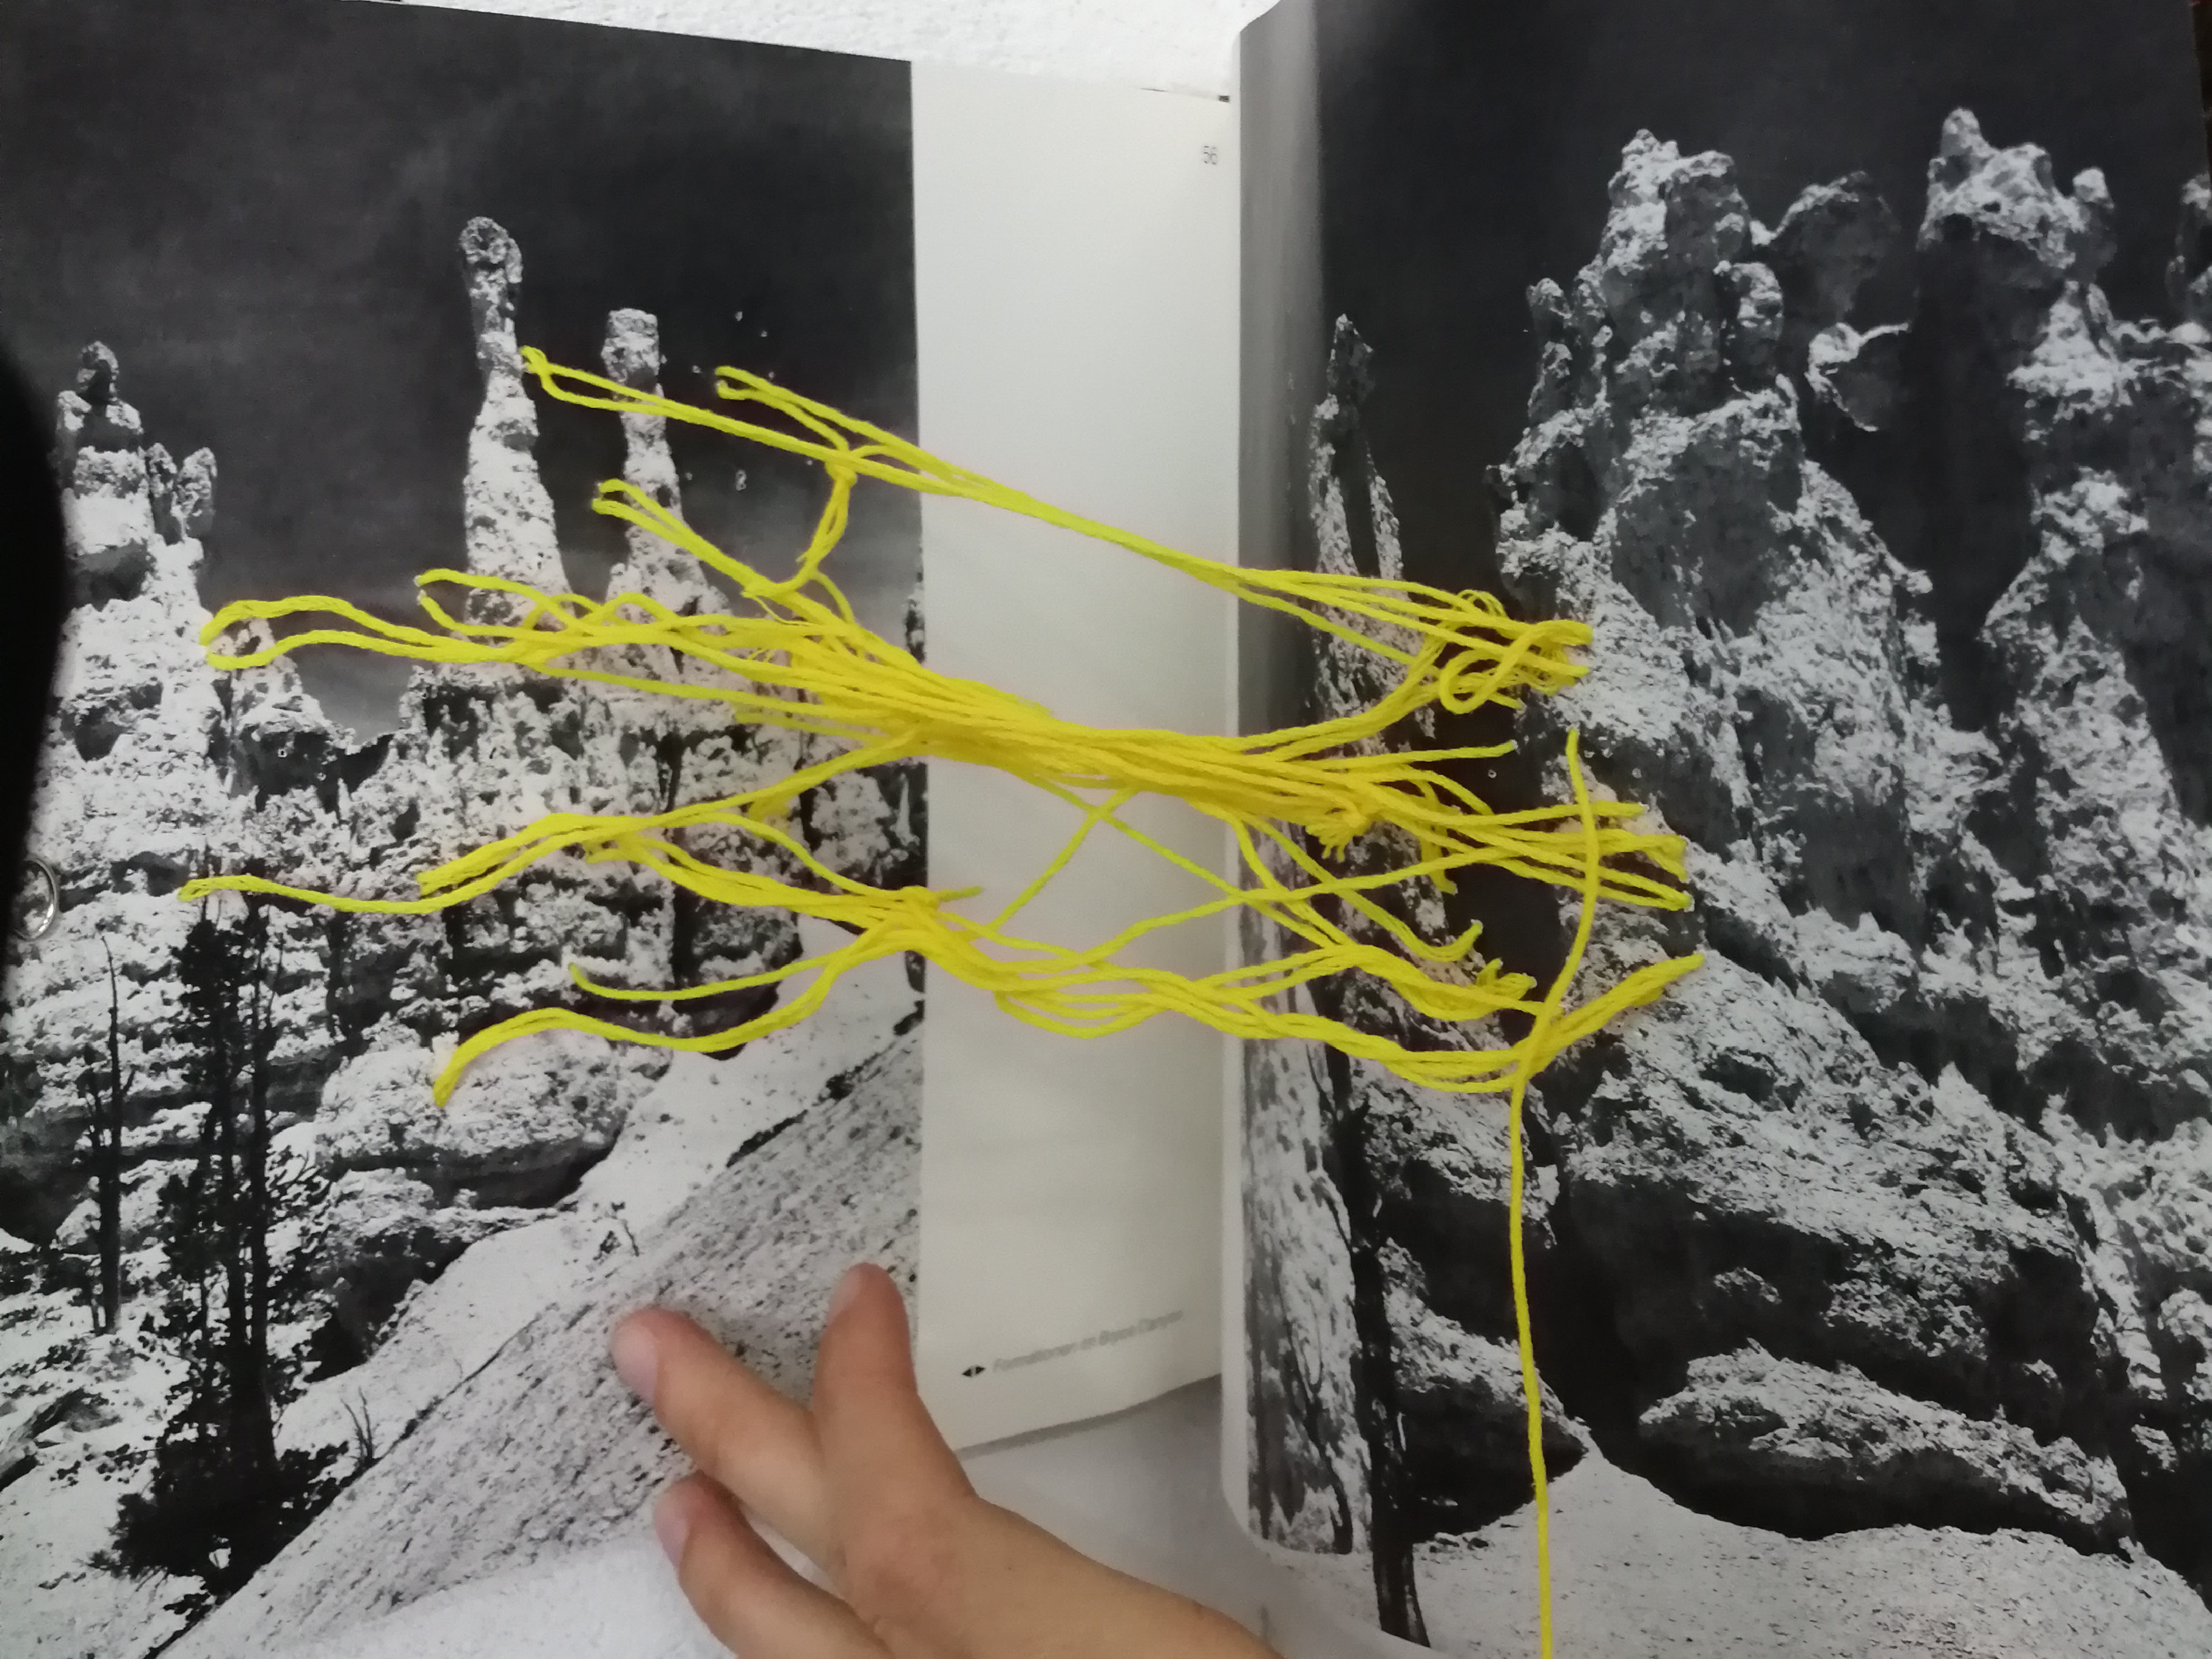 The opposite pages of a book are fixed with yellow string at different points and connected with each other. The pages are printed with black and white photos of rock formations.